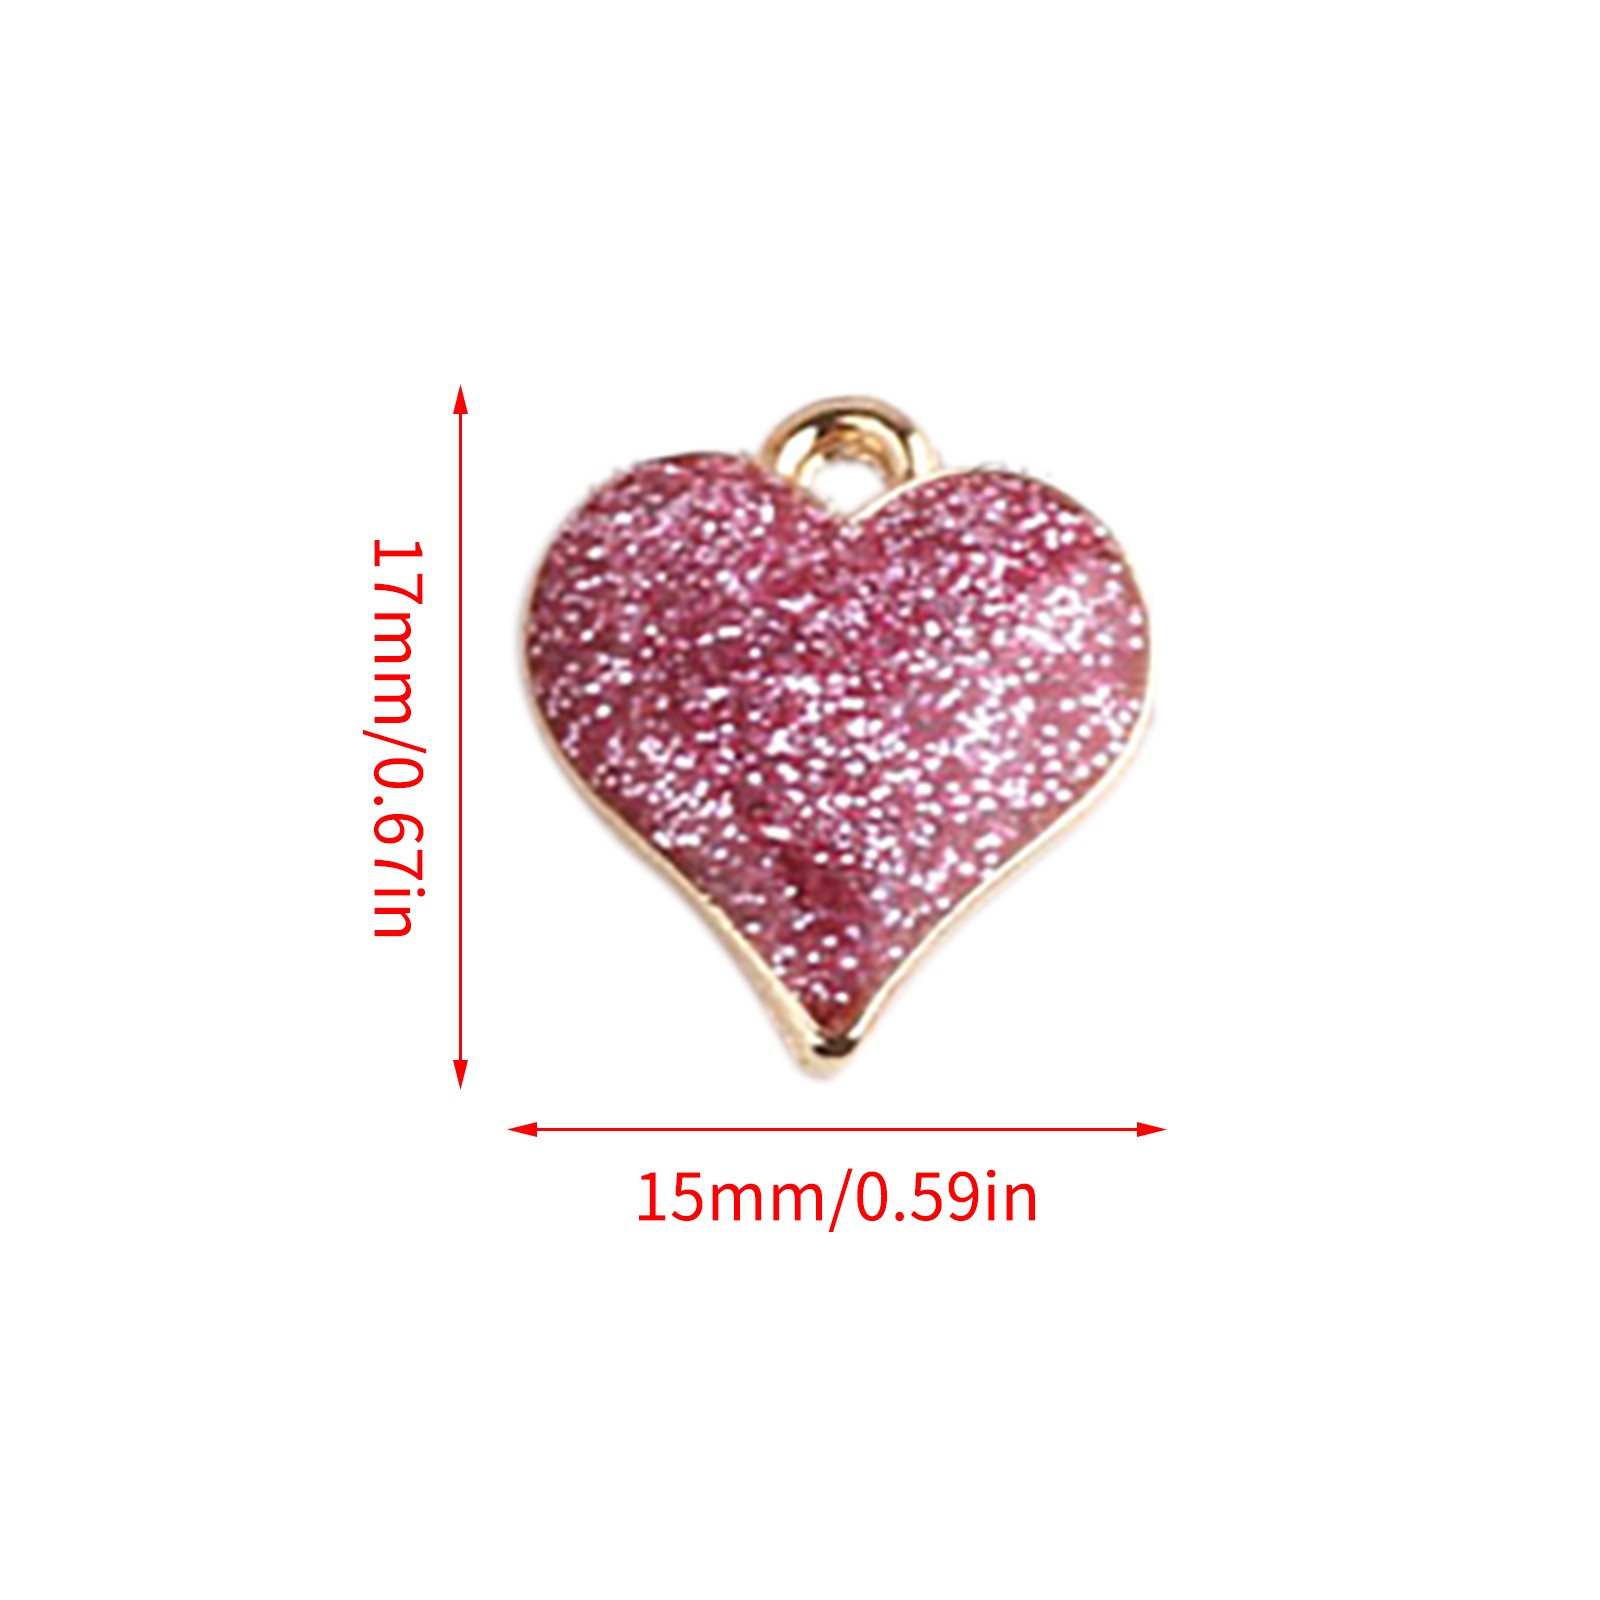 20 PC Heart Shape Charms Bling Charms for Jewelry Making Valentine's Day DIY Earring Bracelet Necklace, Adult Unisex, Size: One size, Gold